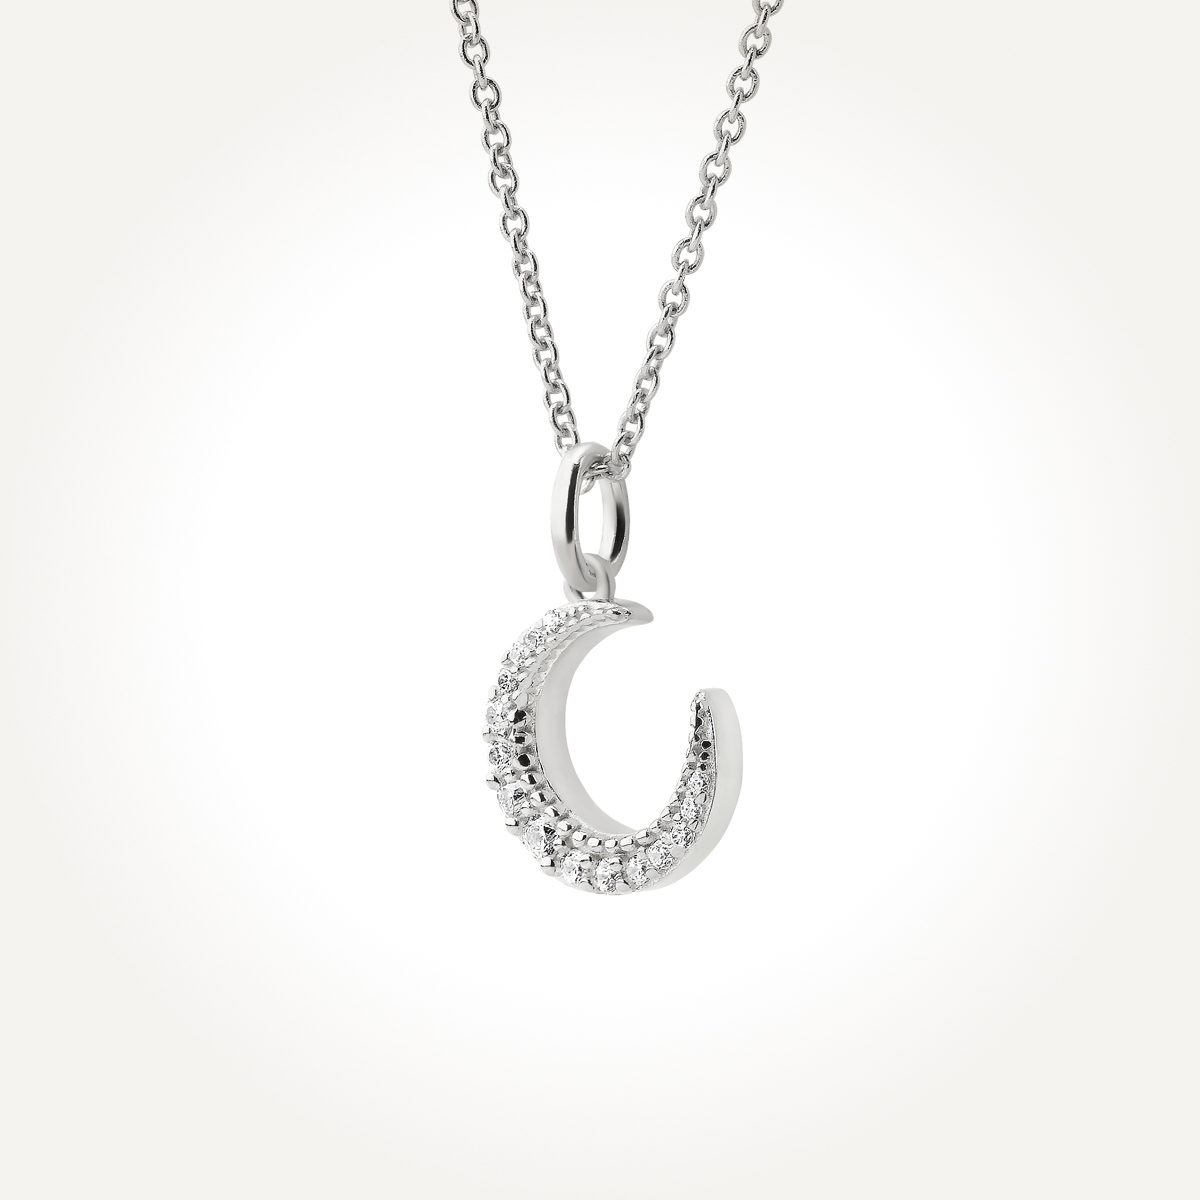 14KT White Gold Moon Necklace